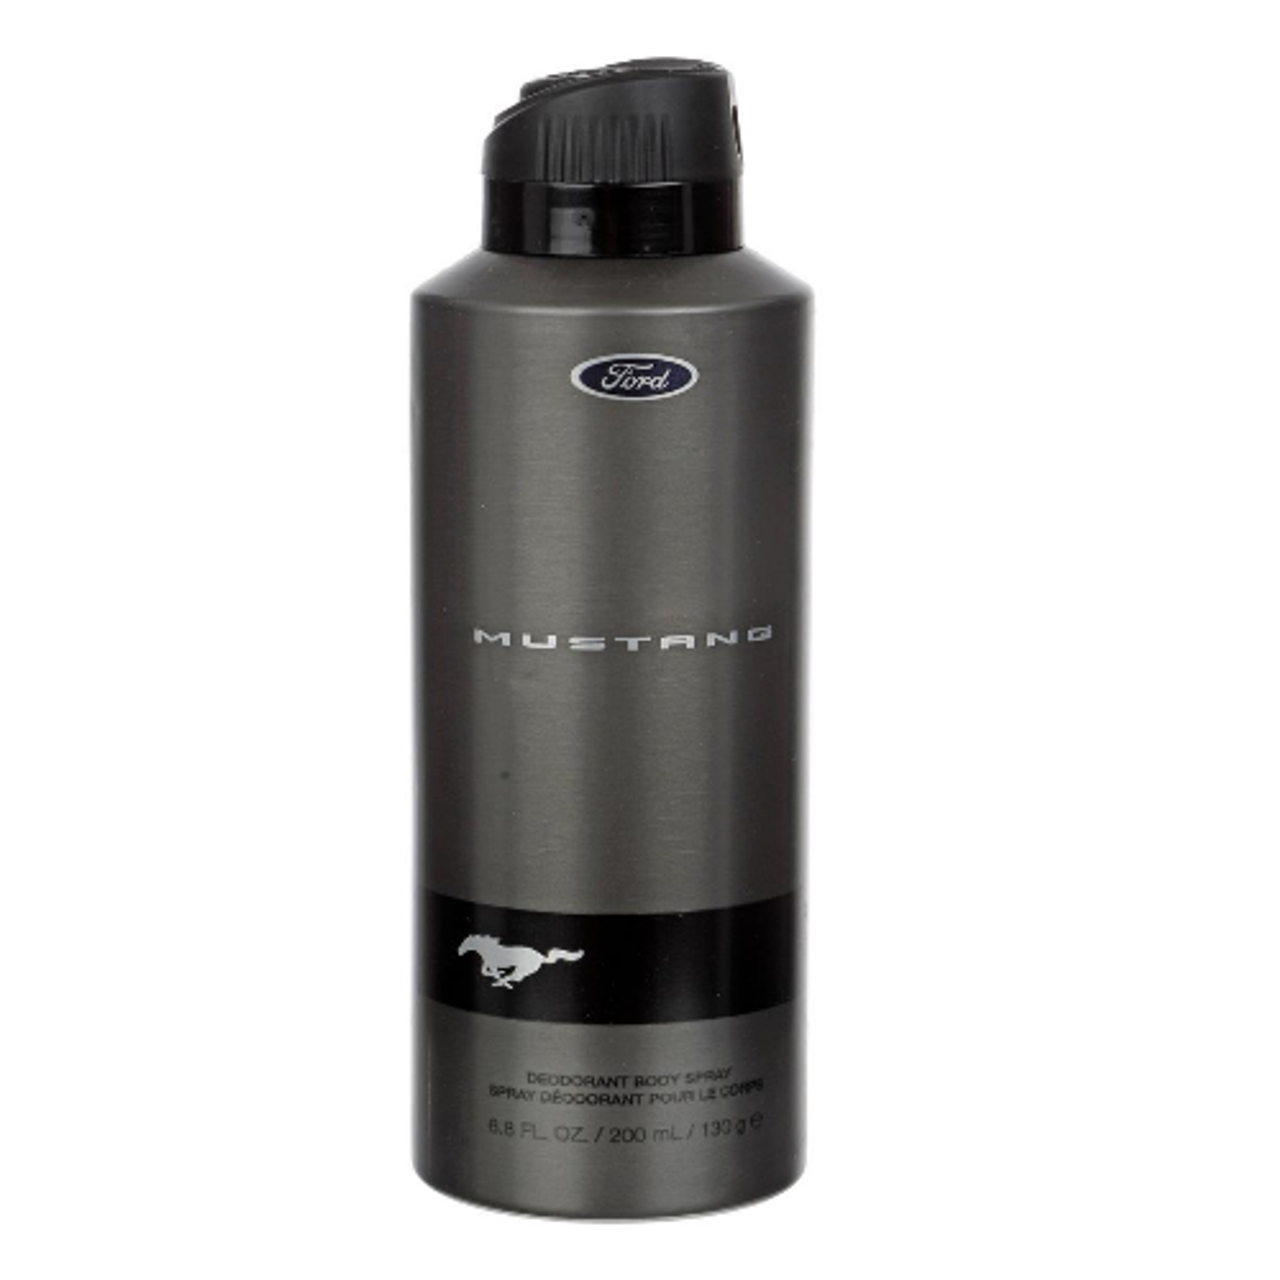 Ford Mustang Black by Ford 6.8 oz Deodorant Body Spray for Men - ForeverLux